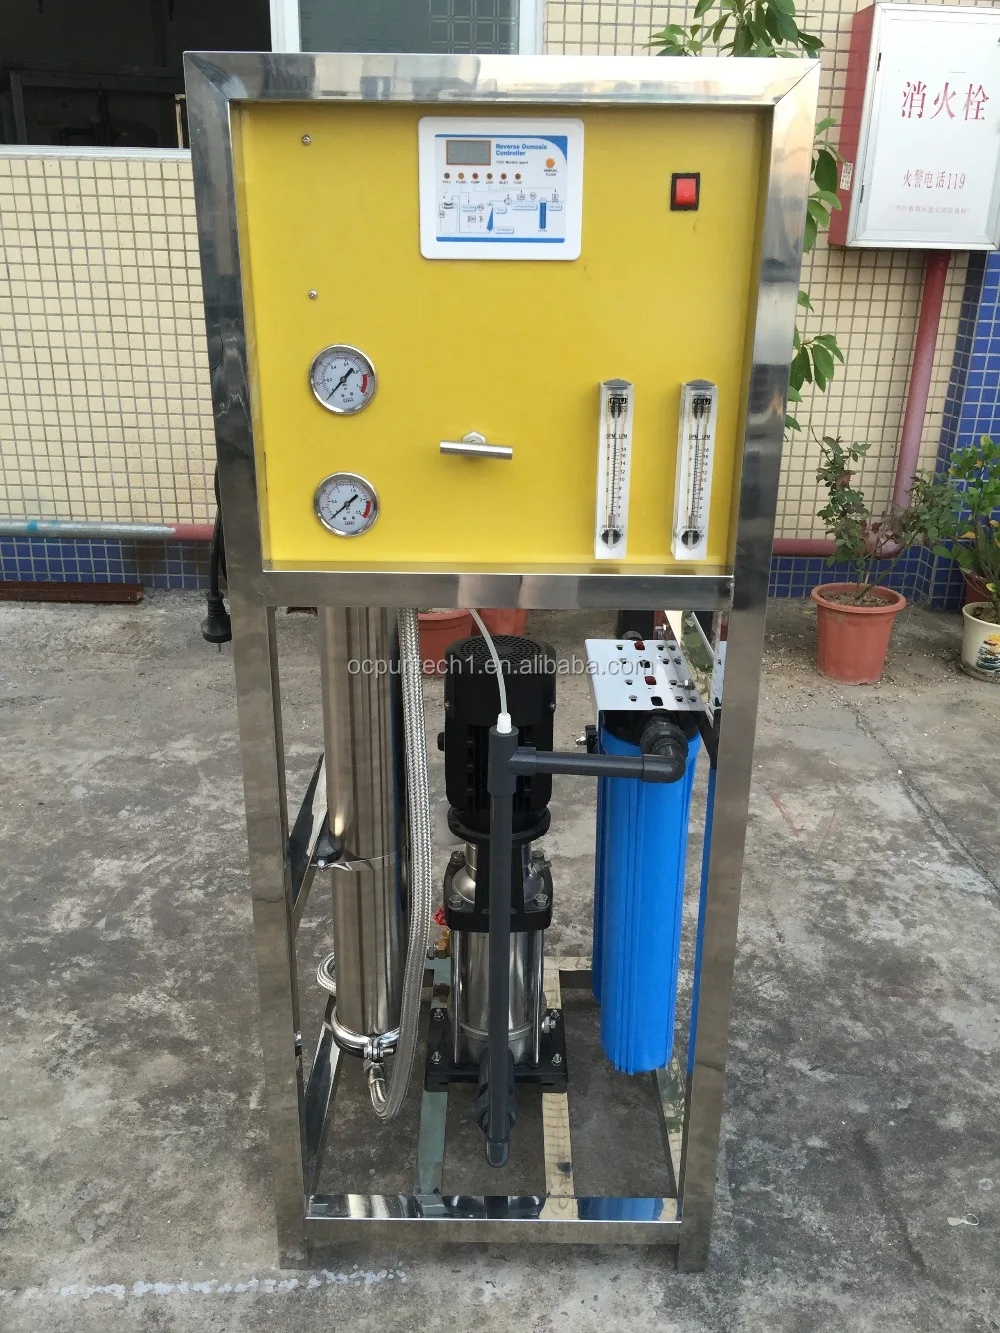 250LPH (1500GPD) RO Water Purification system made in china